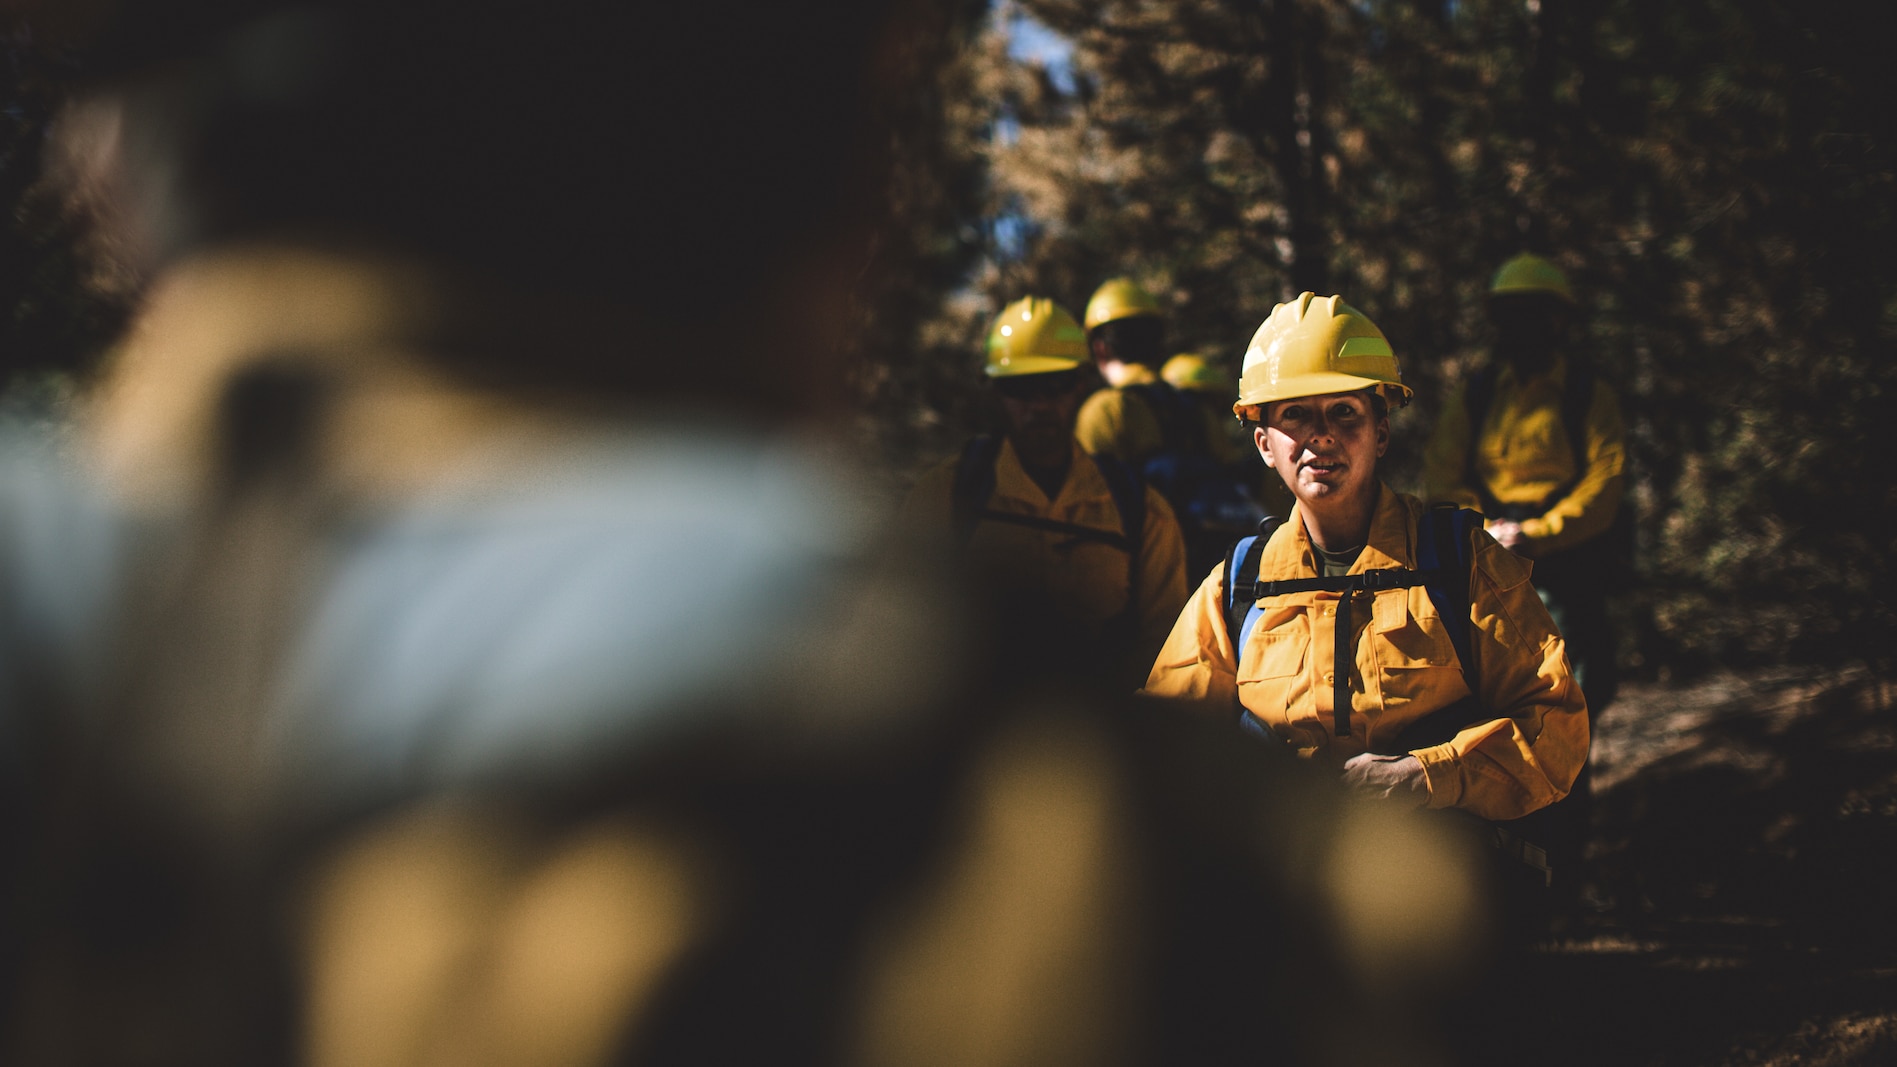 U.S. Marine Corps Brig. Gen. Bobbie Shea, commanding general 1st Marine Logistics Group, visited Marines and Sailors assigned to 7th ESB, who are conducting wildland firefighting efforts near the Shasta-Trinity National Forest, Oct. 17, 2020.